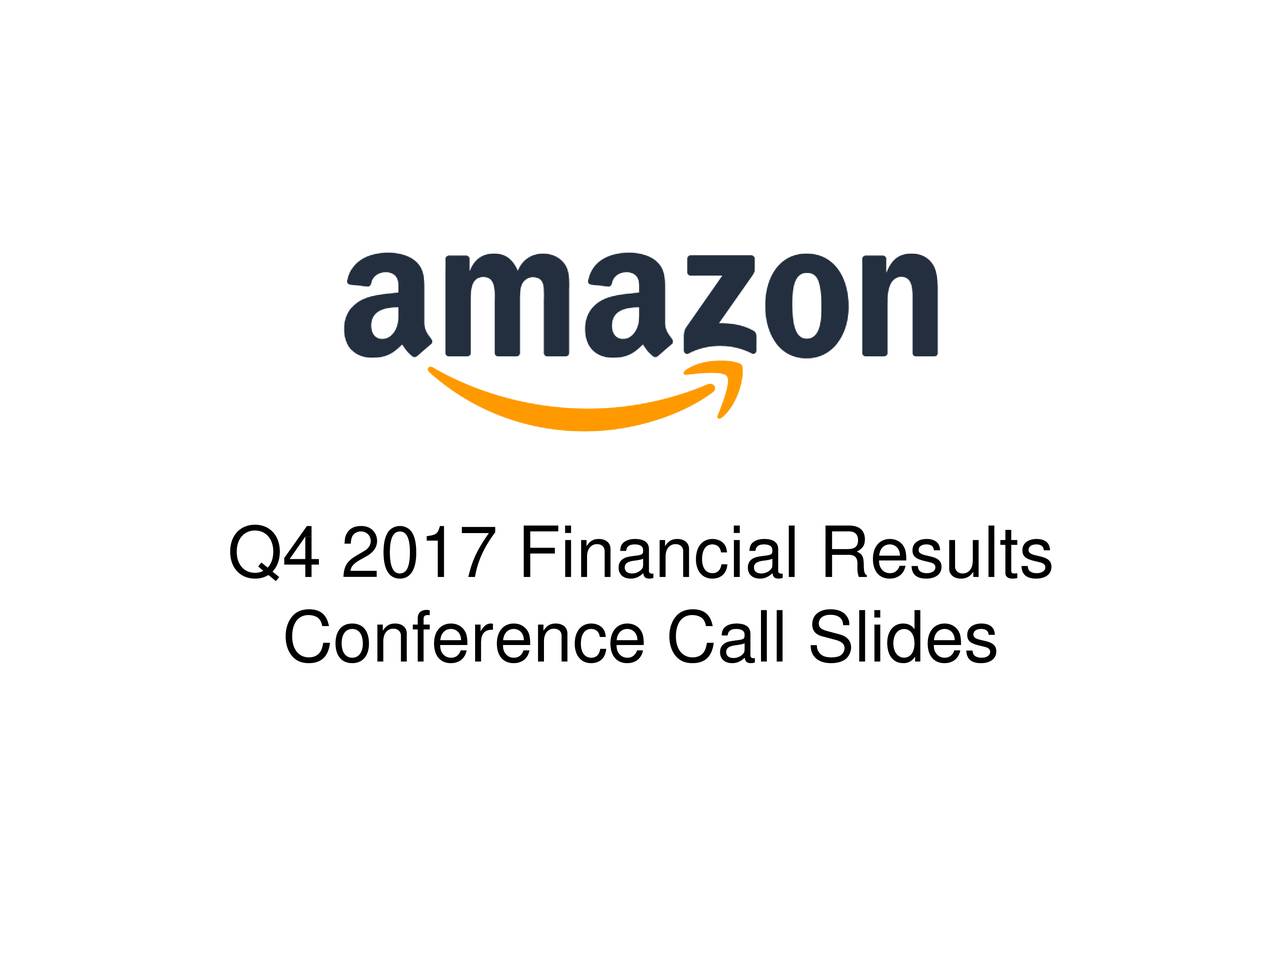 Q4 2017 Financial Results